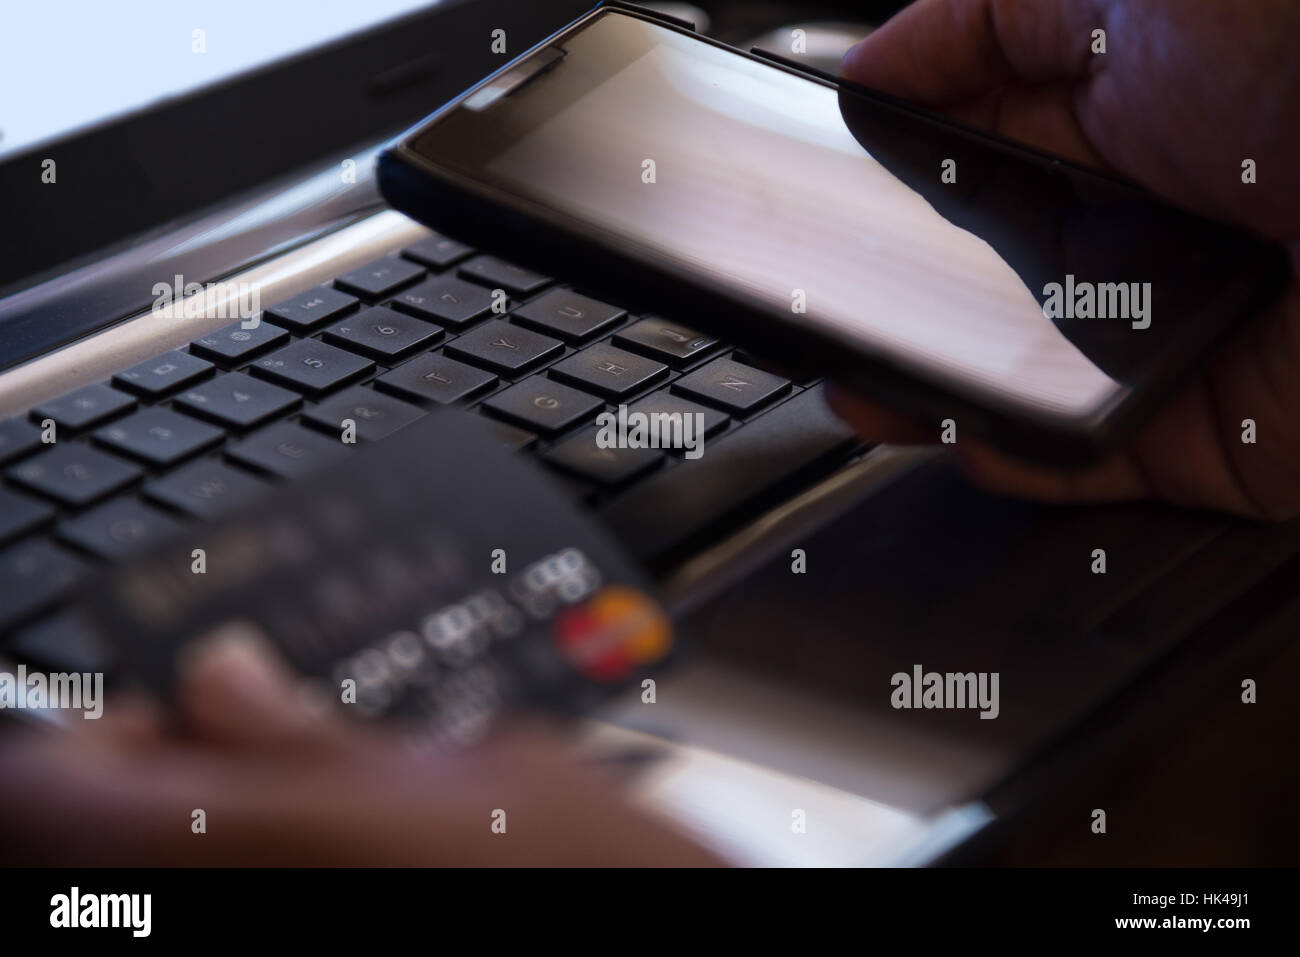 Selective focus on laptop online mobile phone payment internet banking concept in dark low key tone Stock Photo